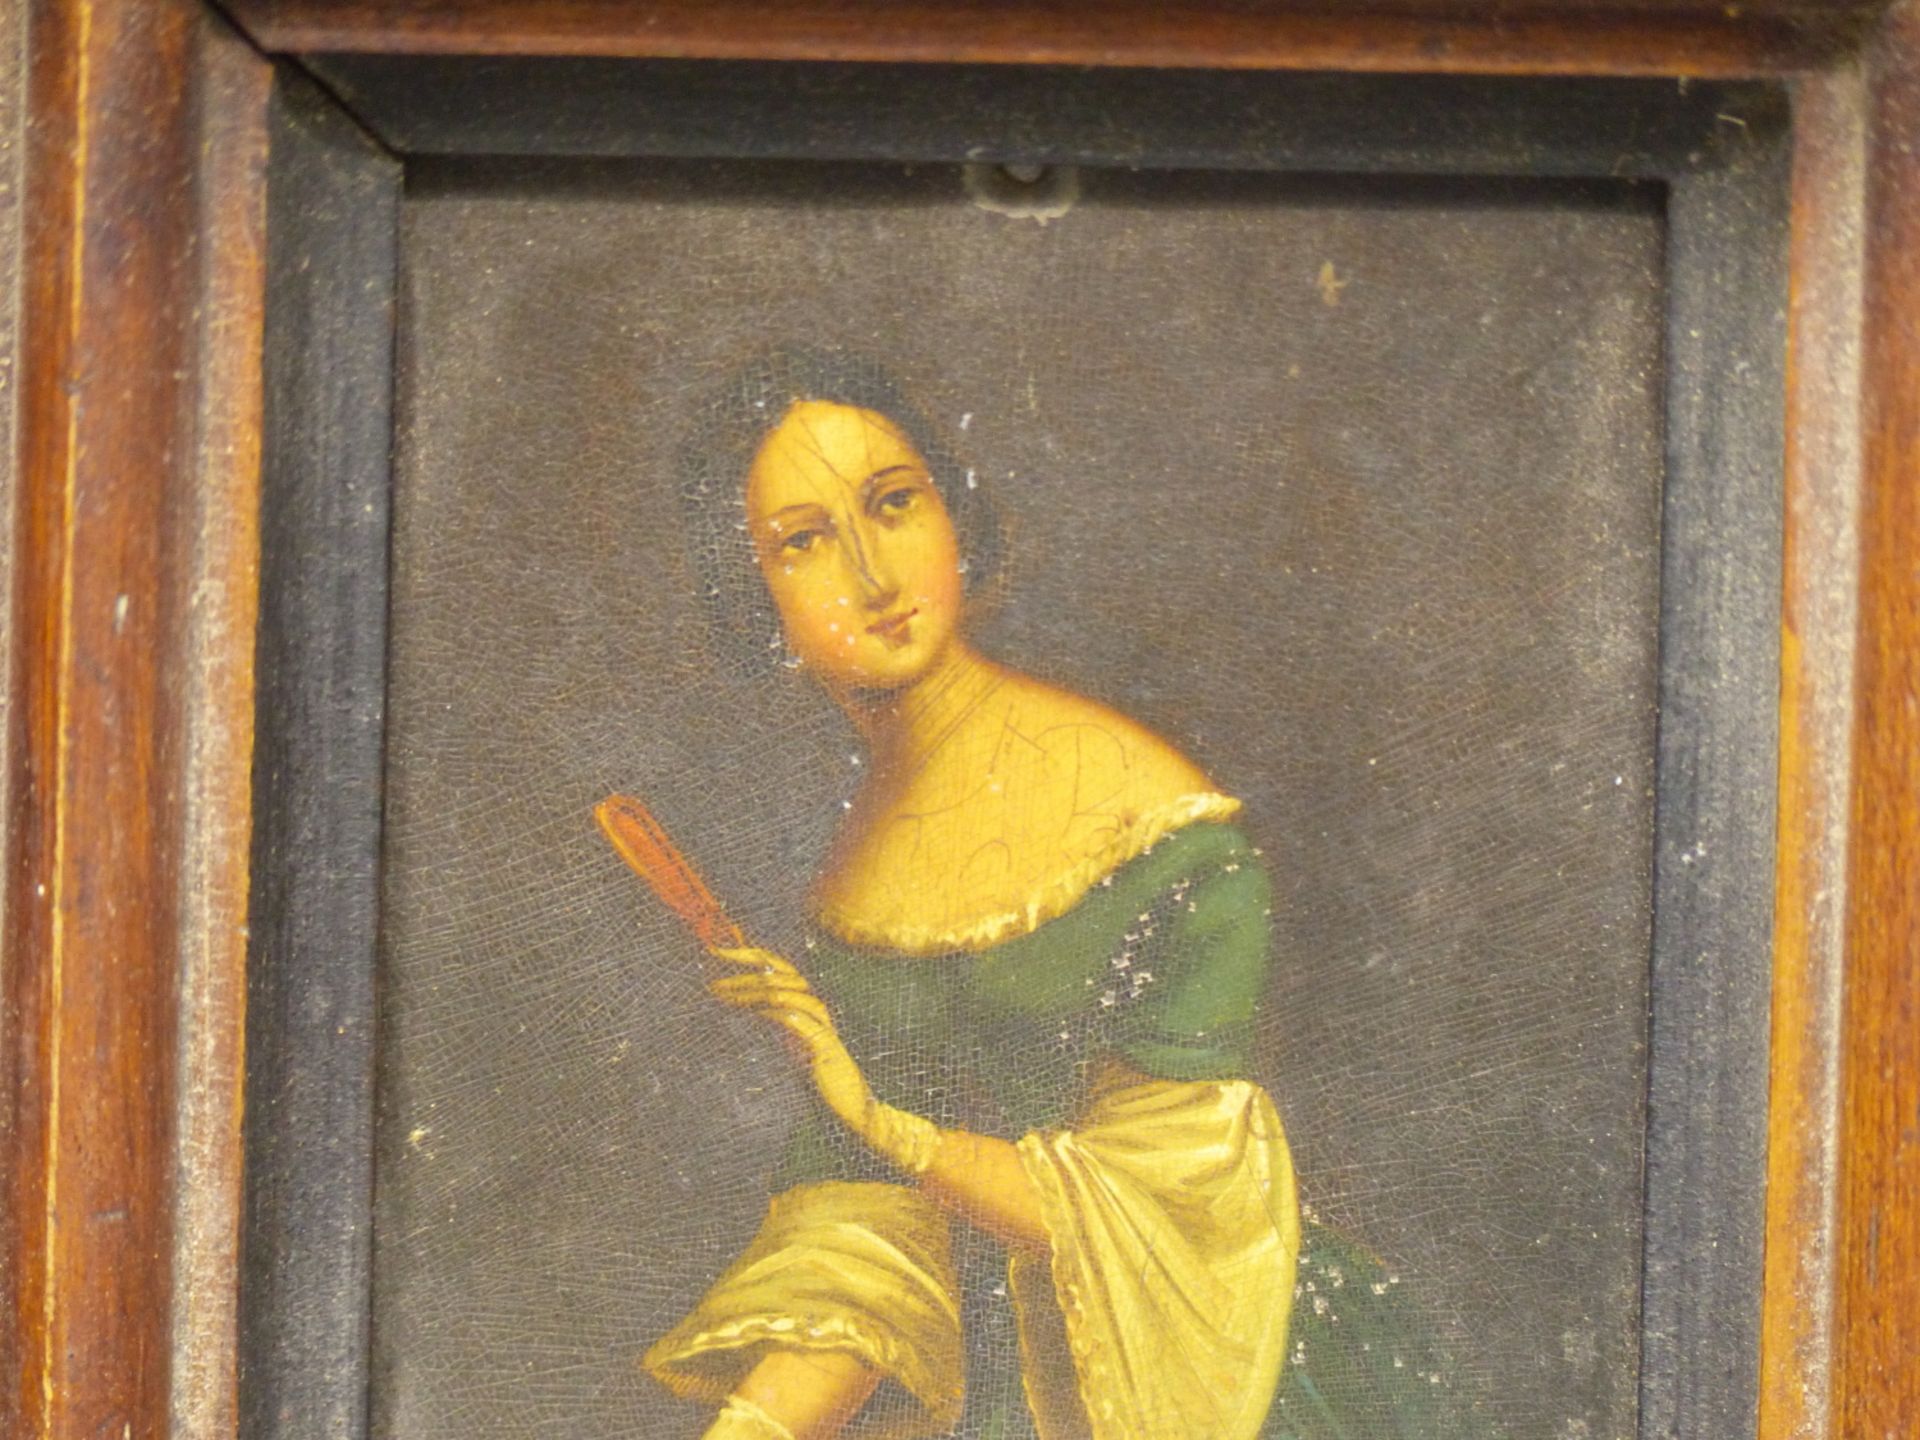 19TH CENTURY CONTINENTAL SCHOOL, STUDY OF A YOUNG LADY, OIL ON METAL PANEL. 7.5 X 10 cm. - Image 4 of 5